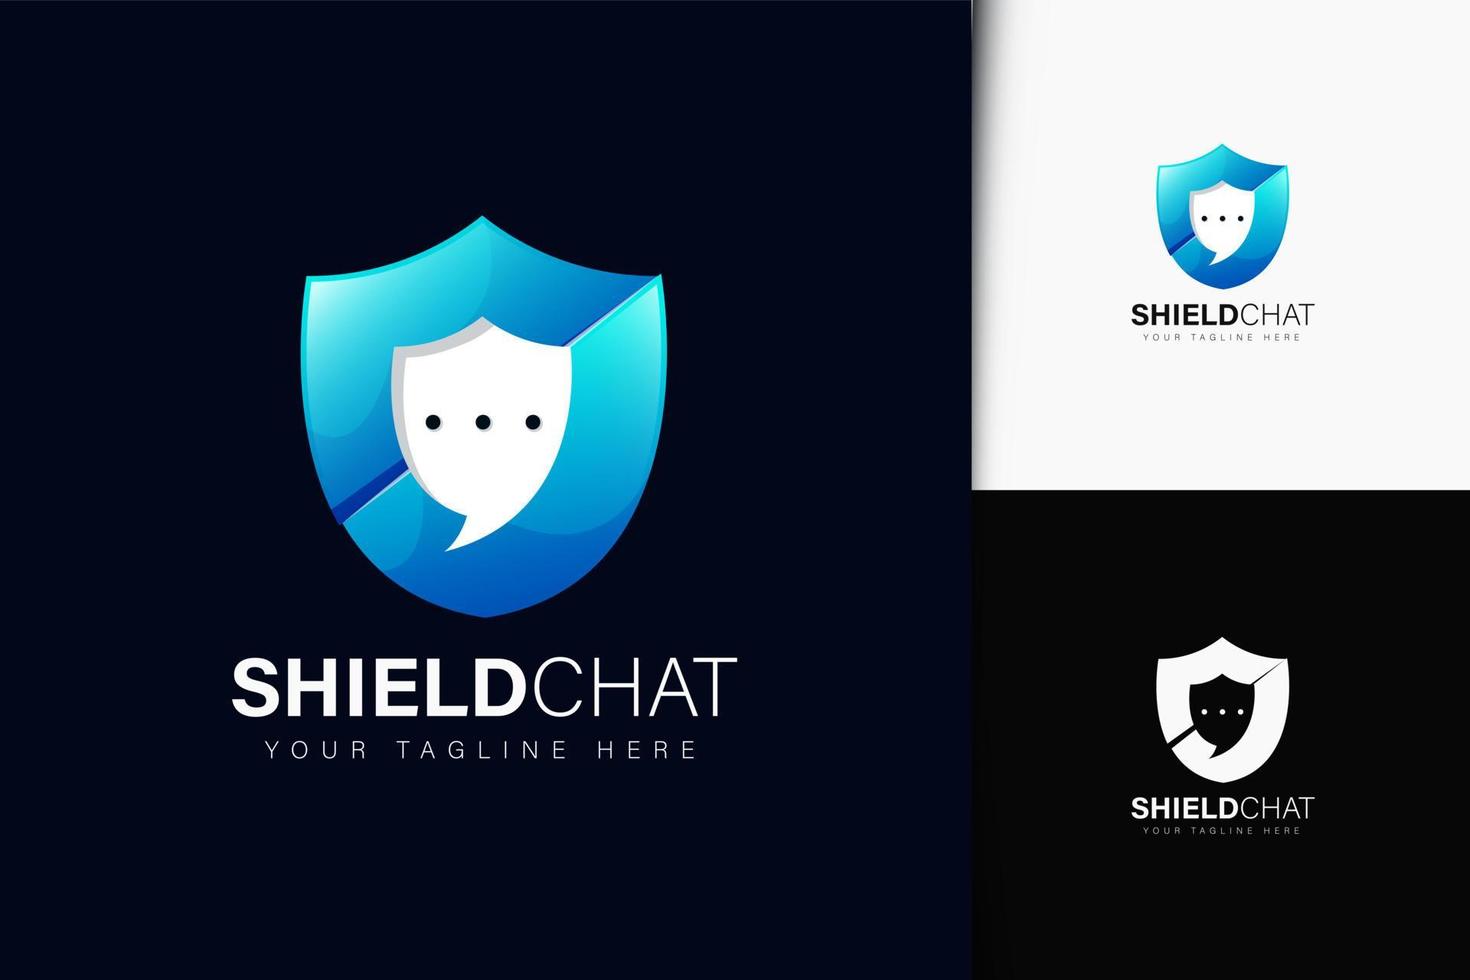 Shield chat logo design with gradient vector